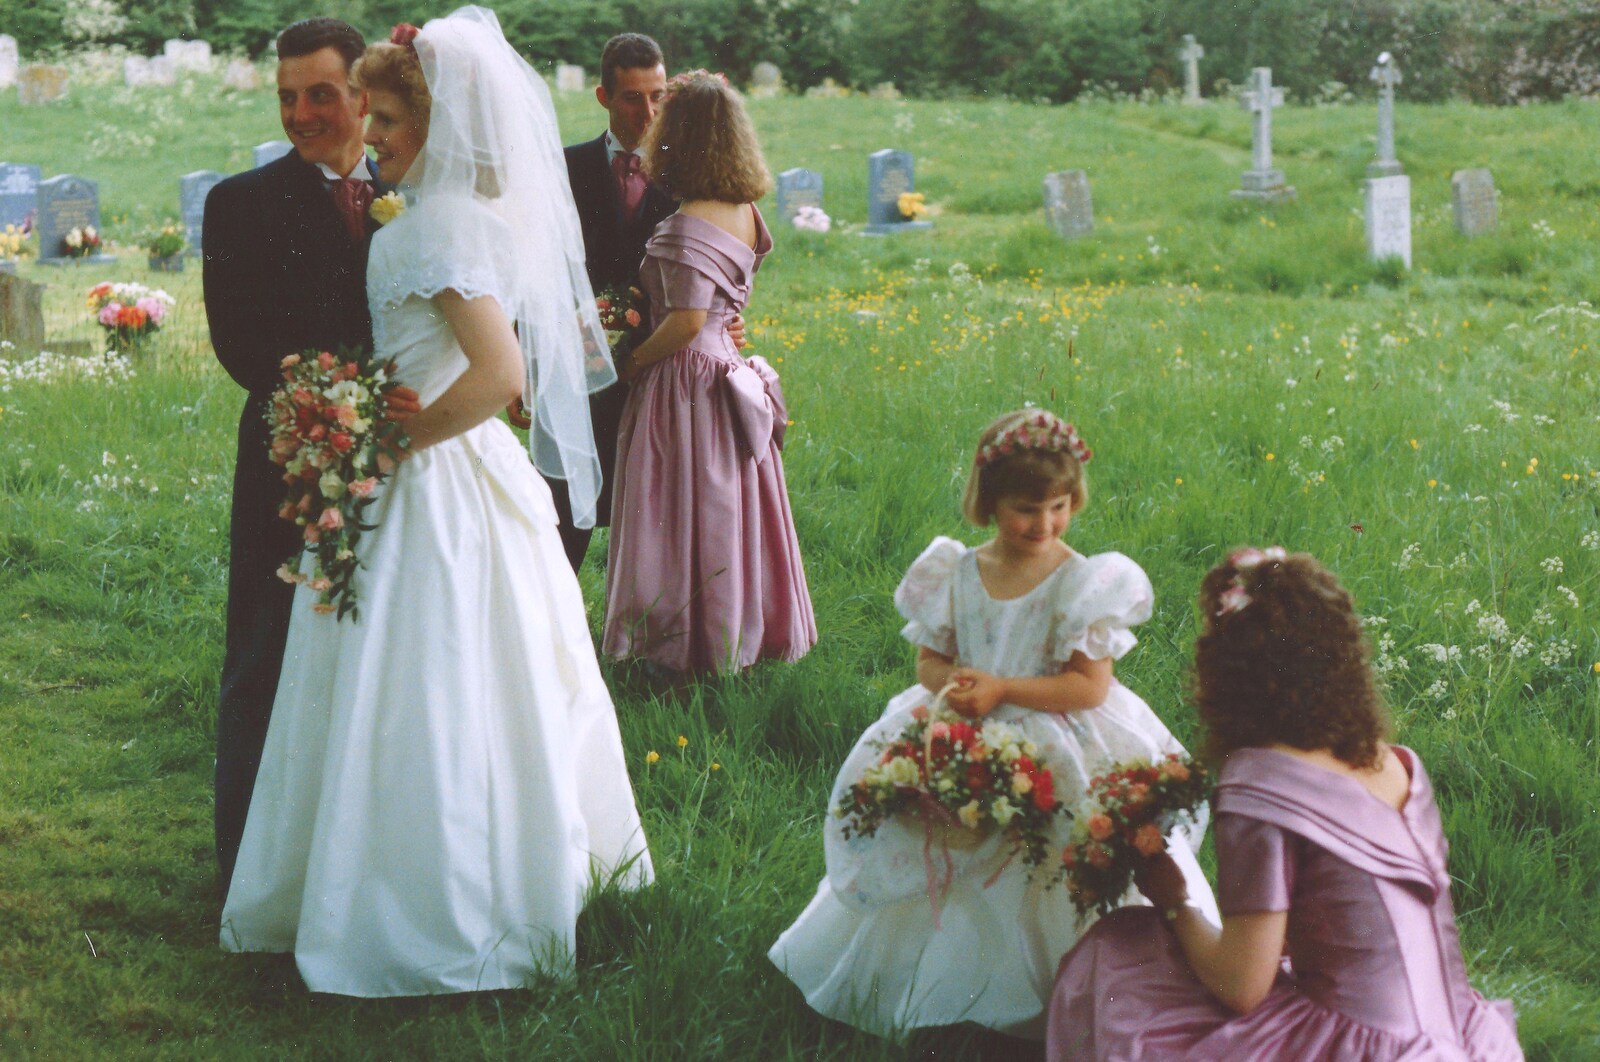 Outside in the churchyard from Debbie's Wedding, Suffolk - 12th June 1999